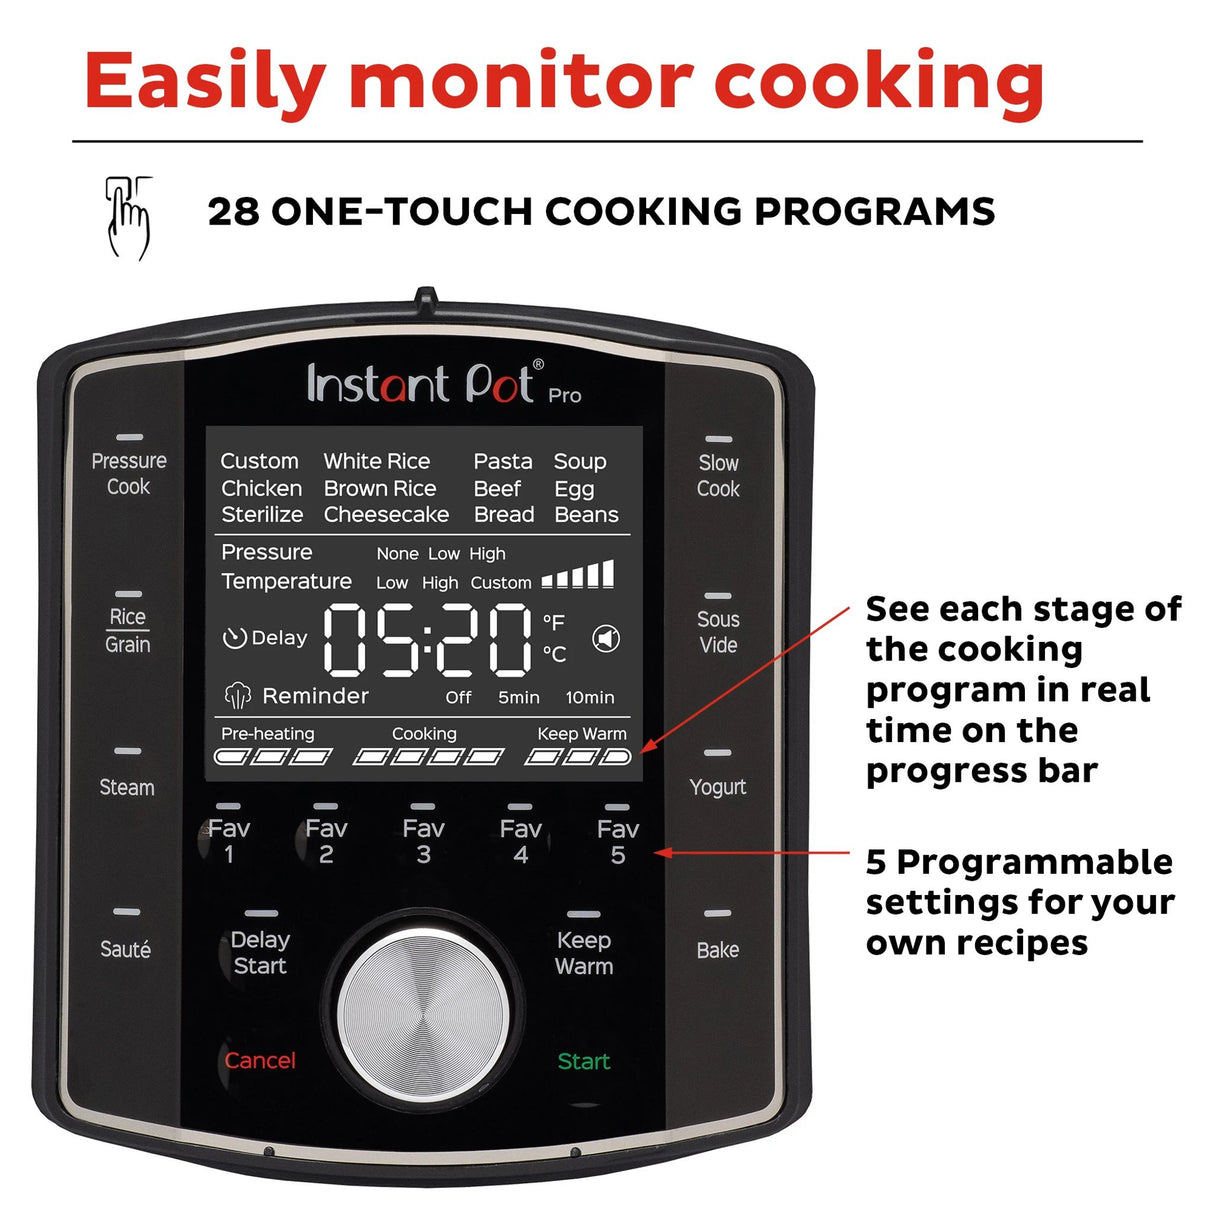  Instant Pot Pro 8 quart multi-use pressure cooker with text Easily monitor cooking